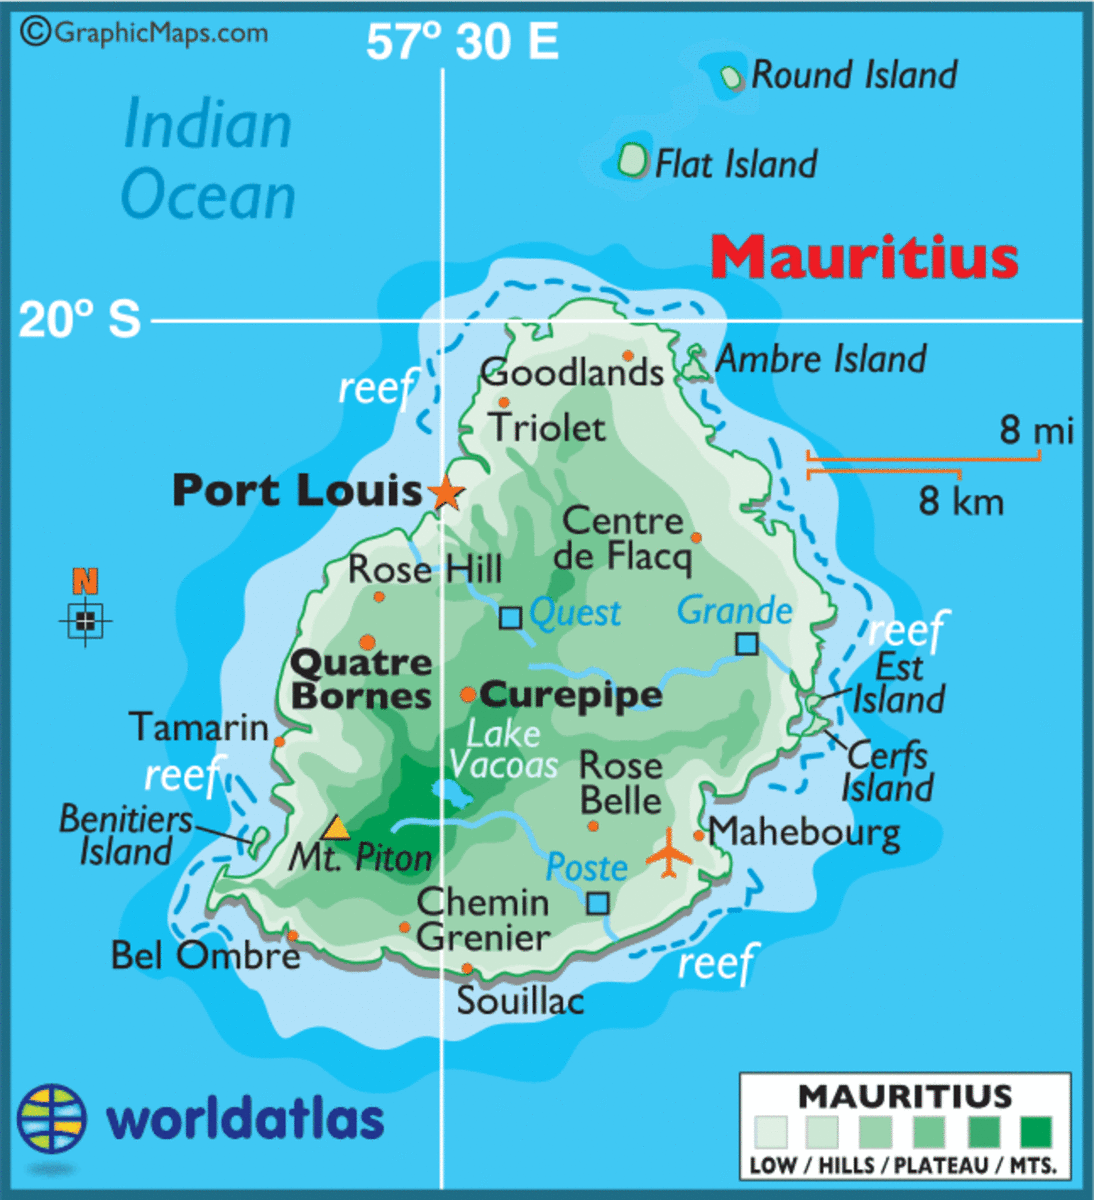 Mauritius, Paradise Island of the Indian Ocean: Contrasts; Nature, People, Infrastructure, Weather, Tourism